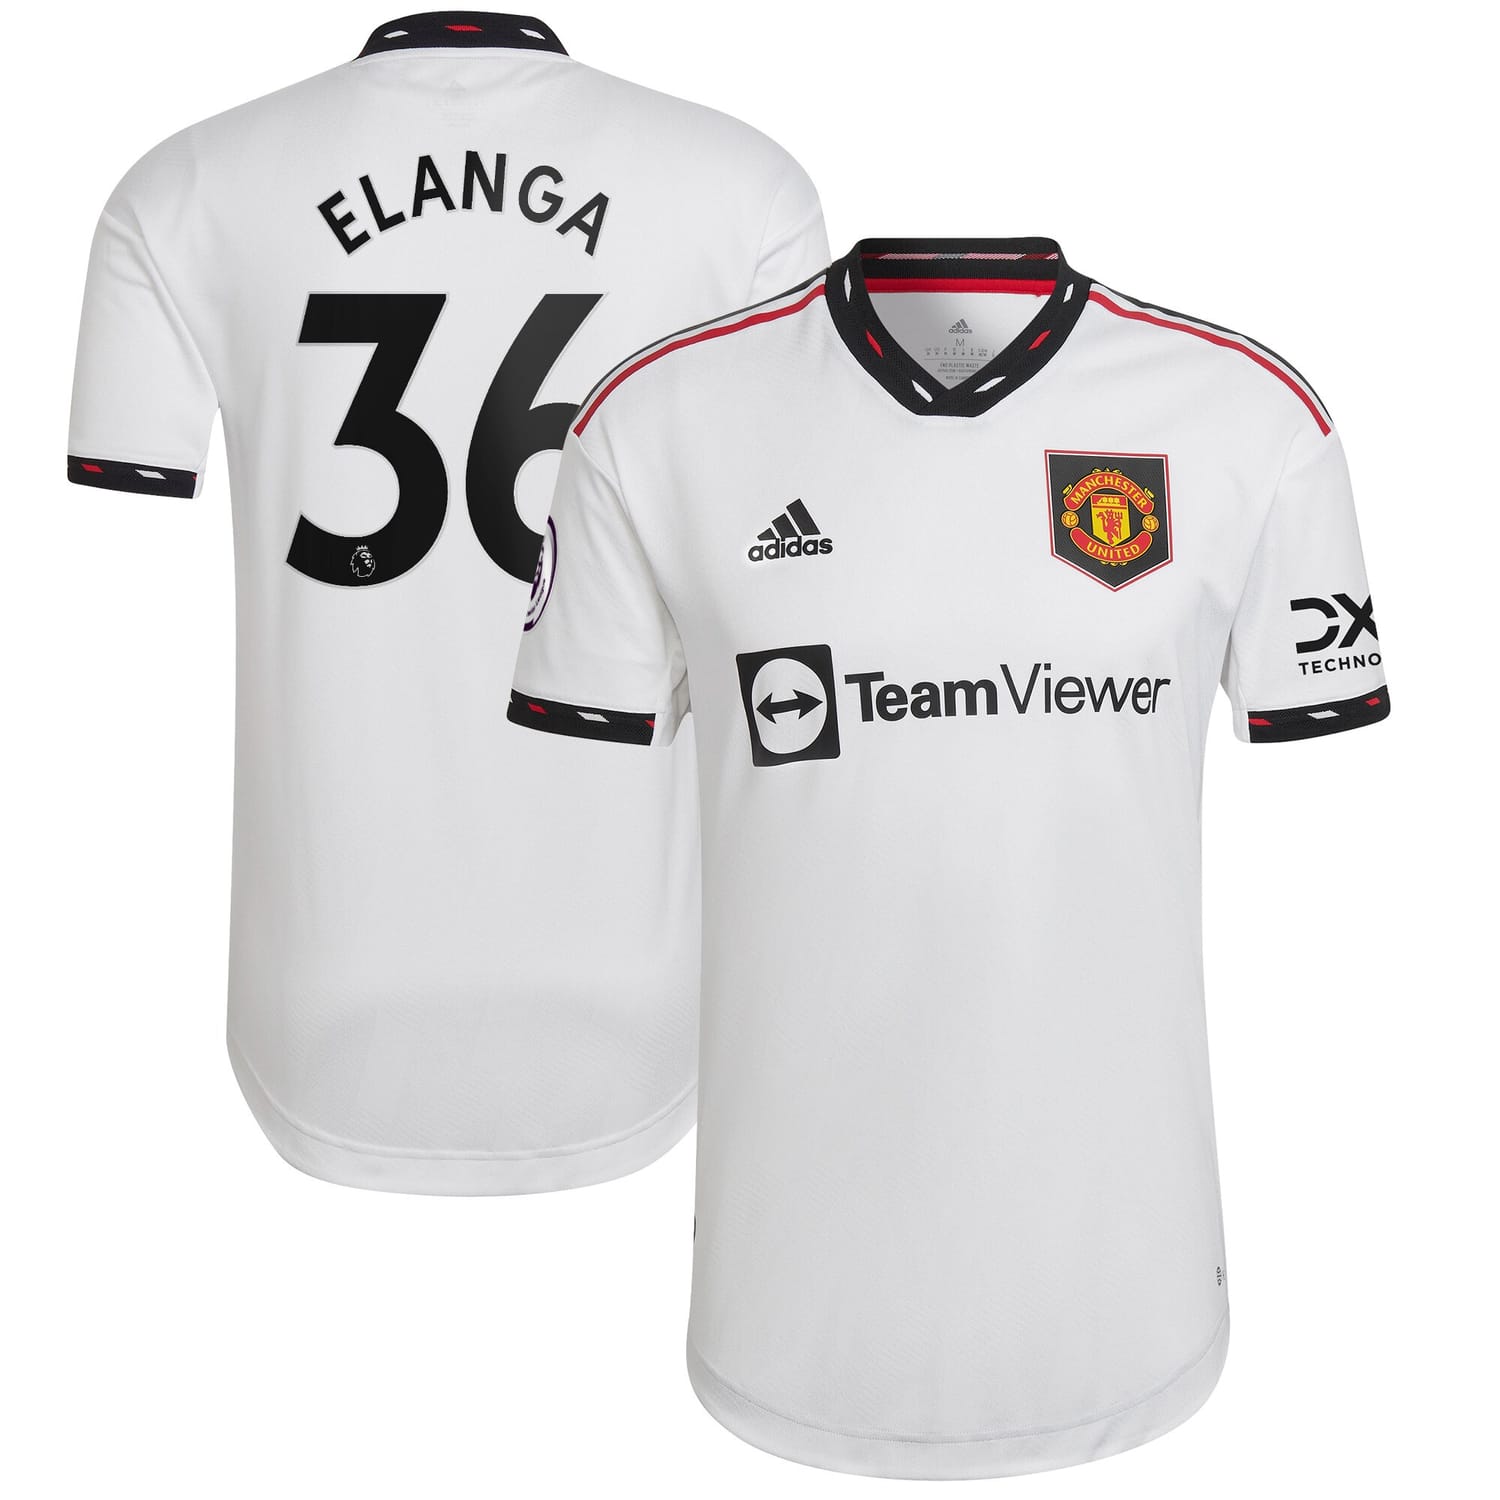 Premier League Manchester United Away Authentic Jersey Shirt White 2022-23 player Anthony Elanga printing for Men